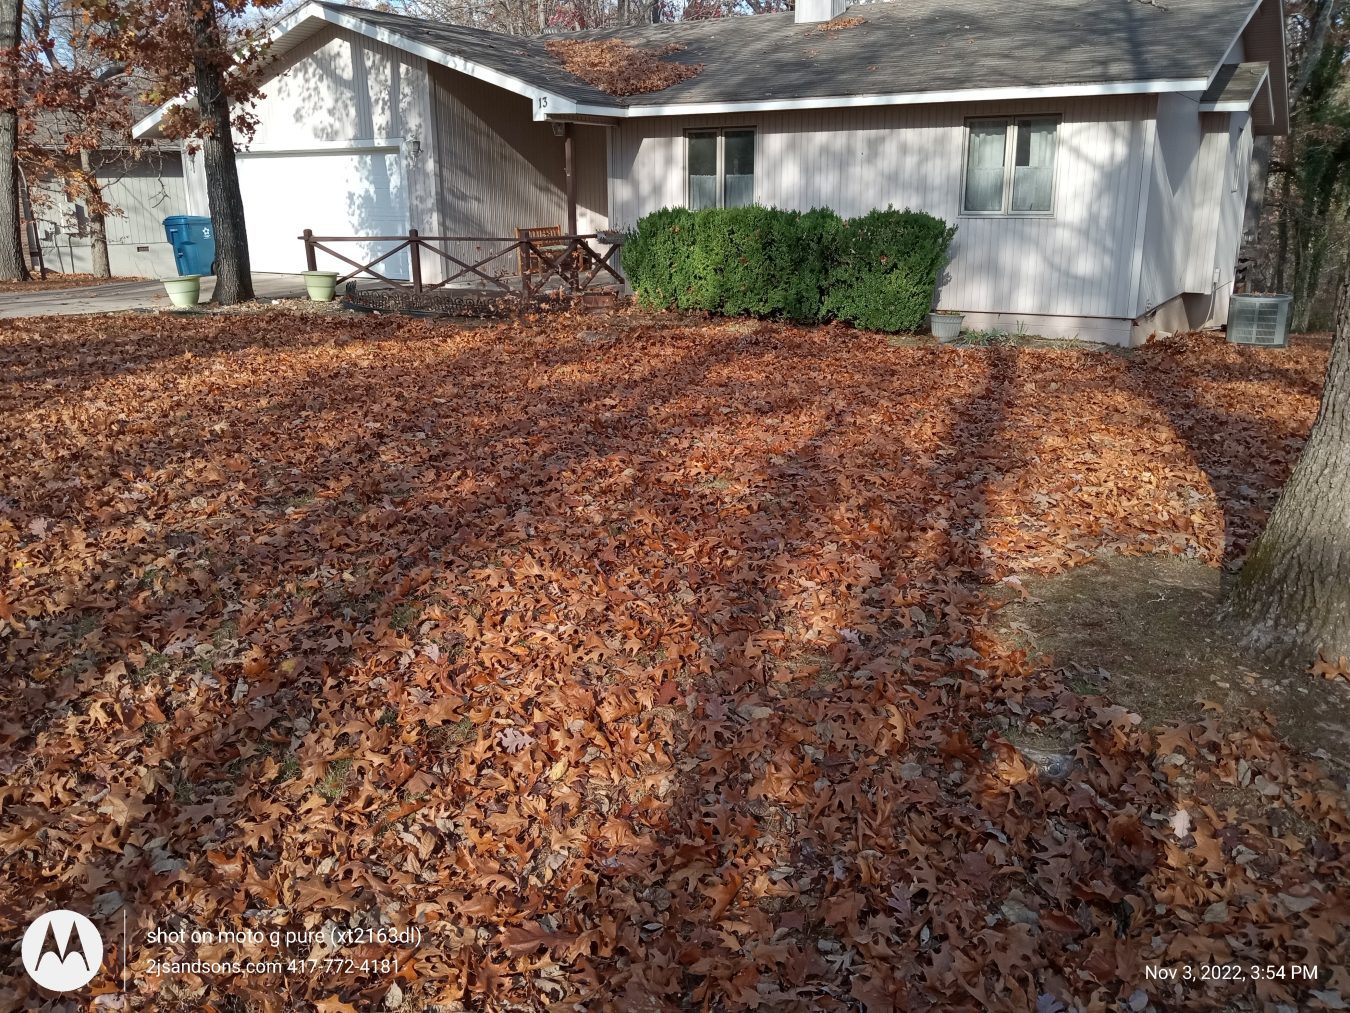 Lot Cleanup, fall leave removal for erosion